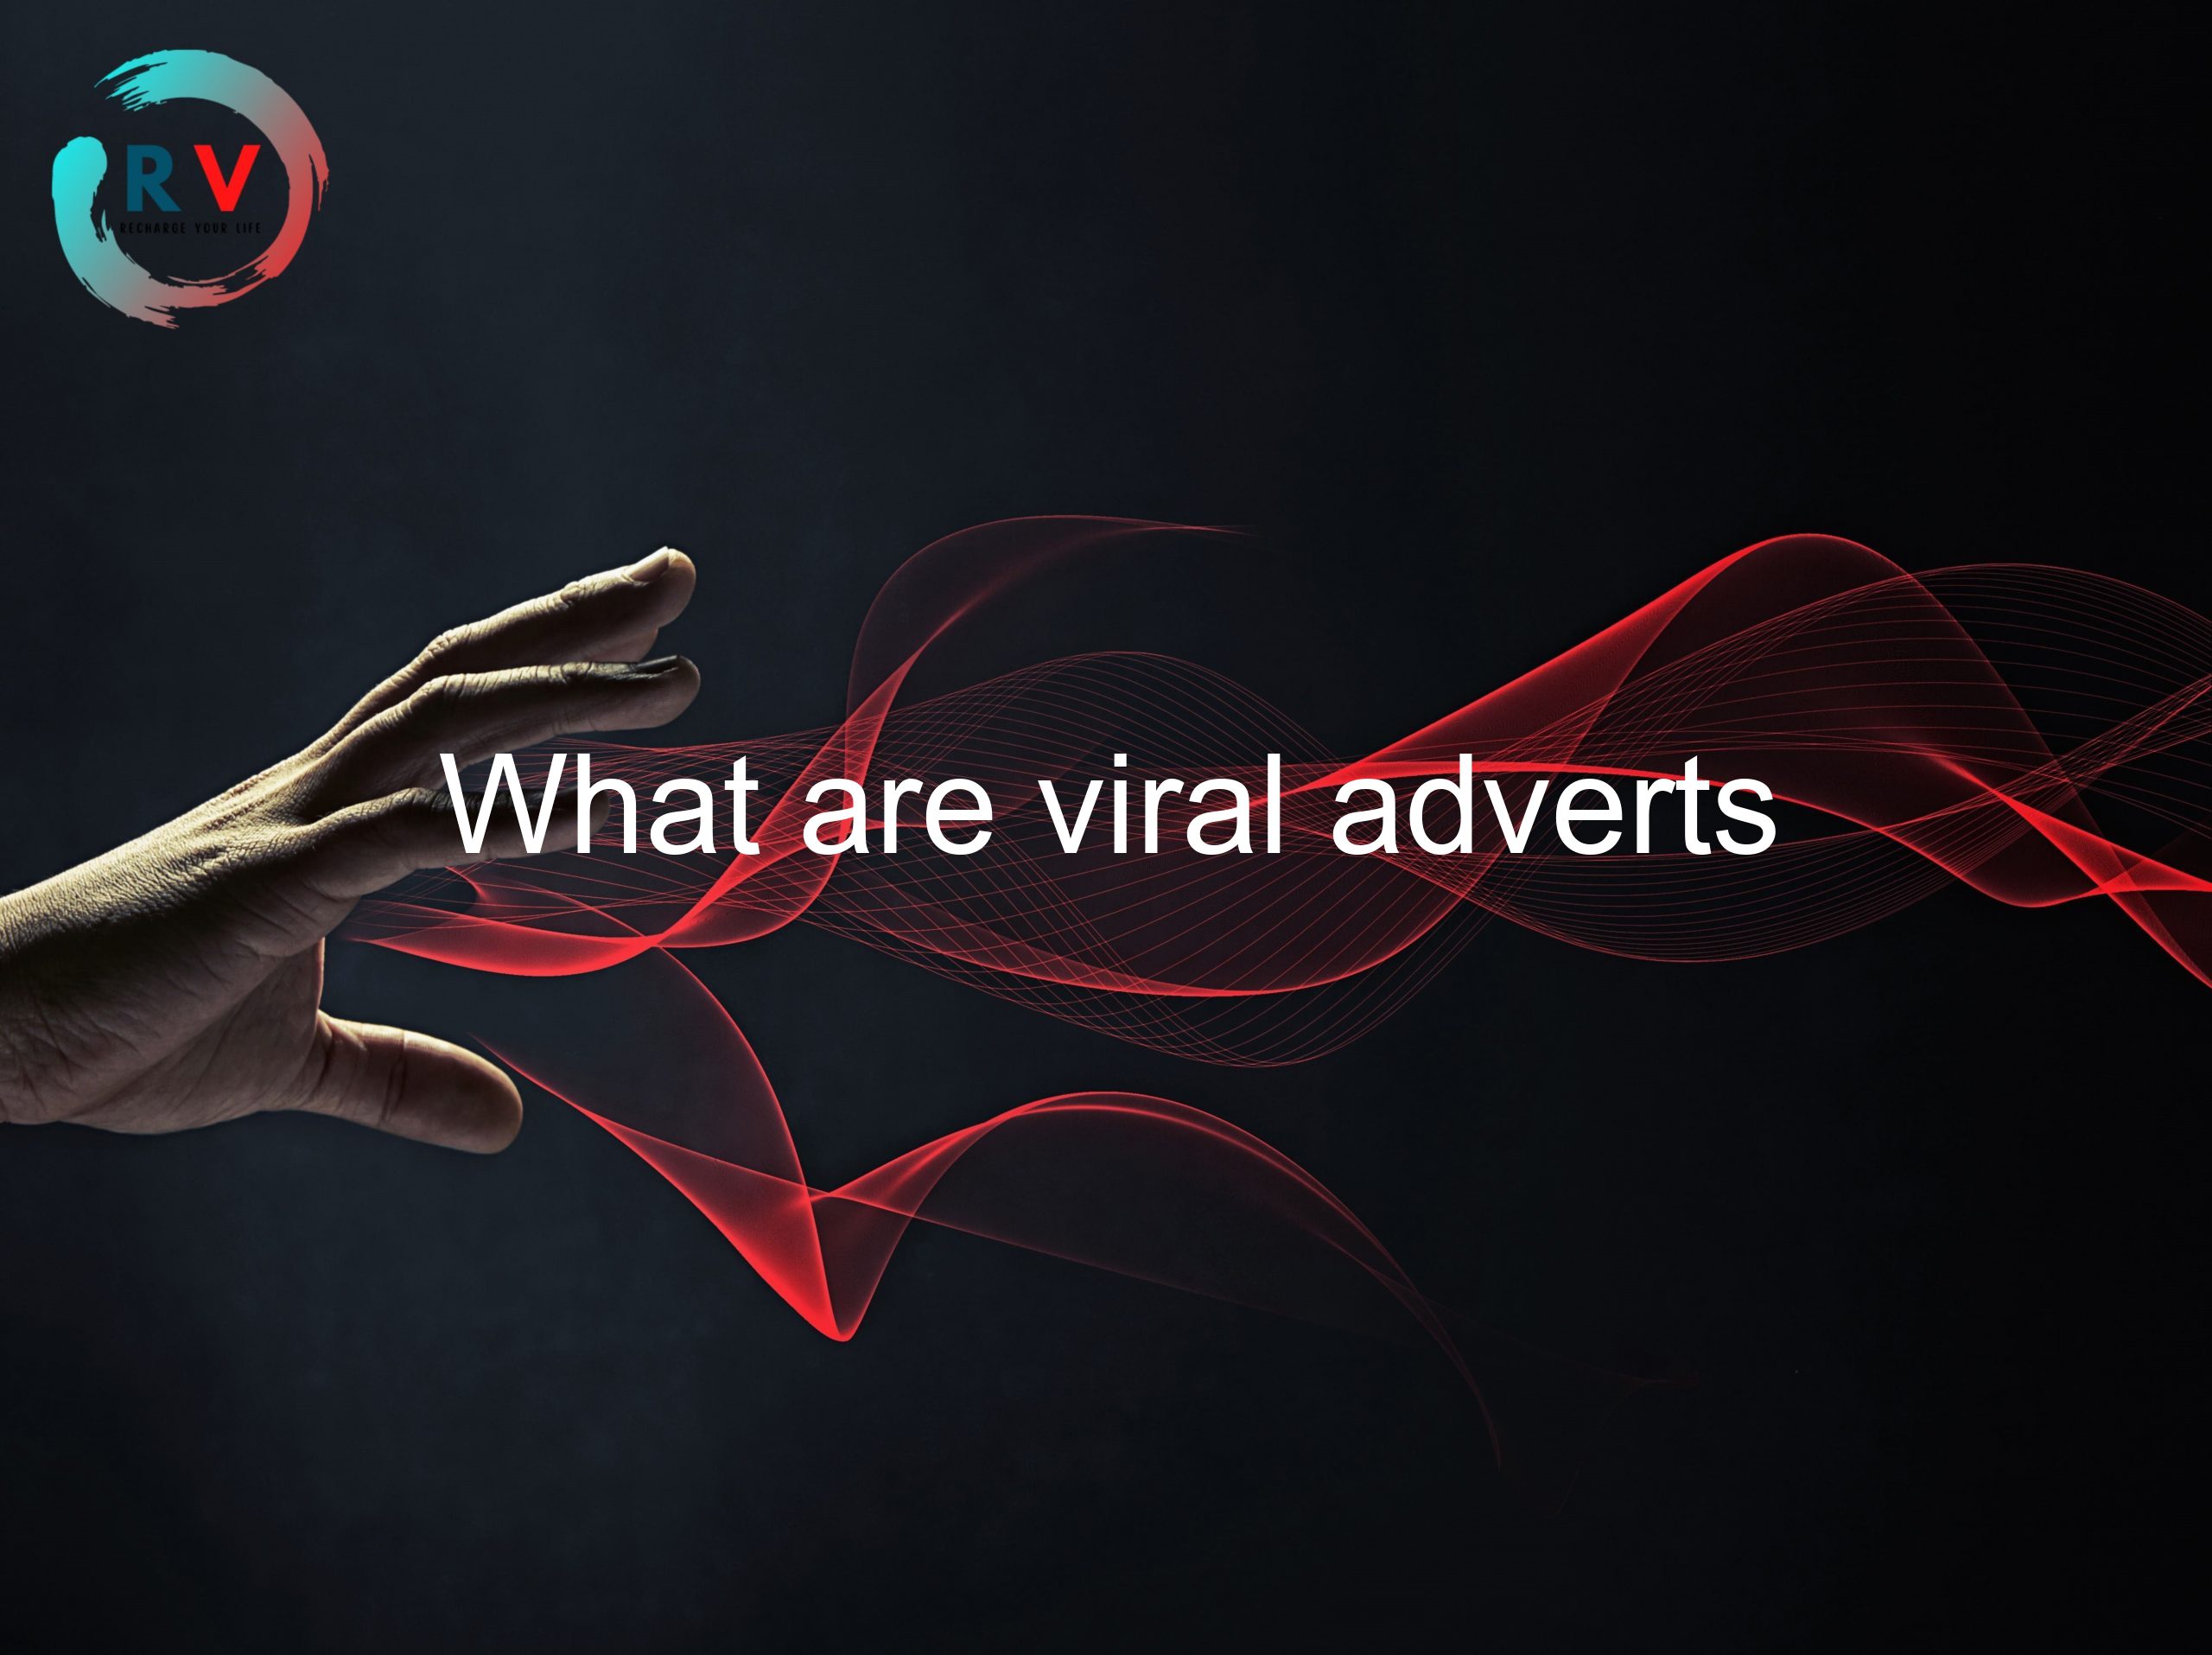 What are viral adverts